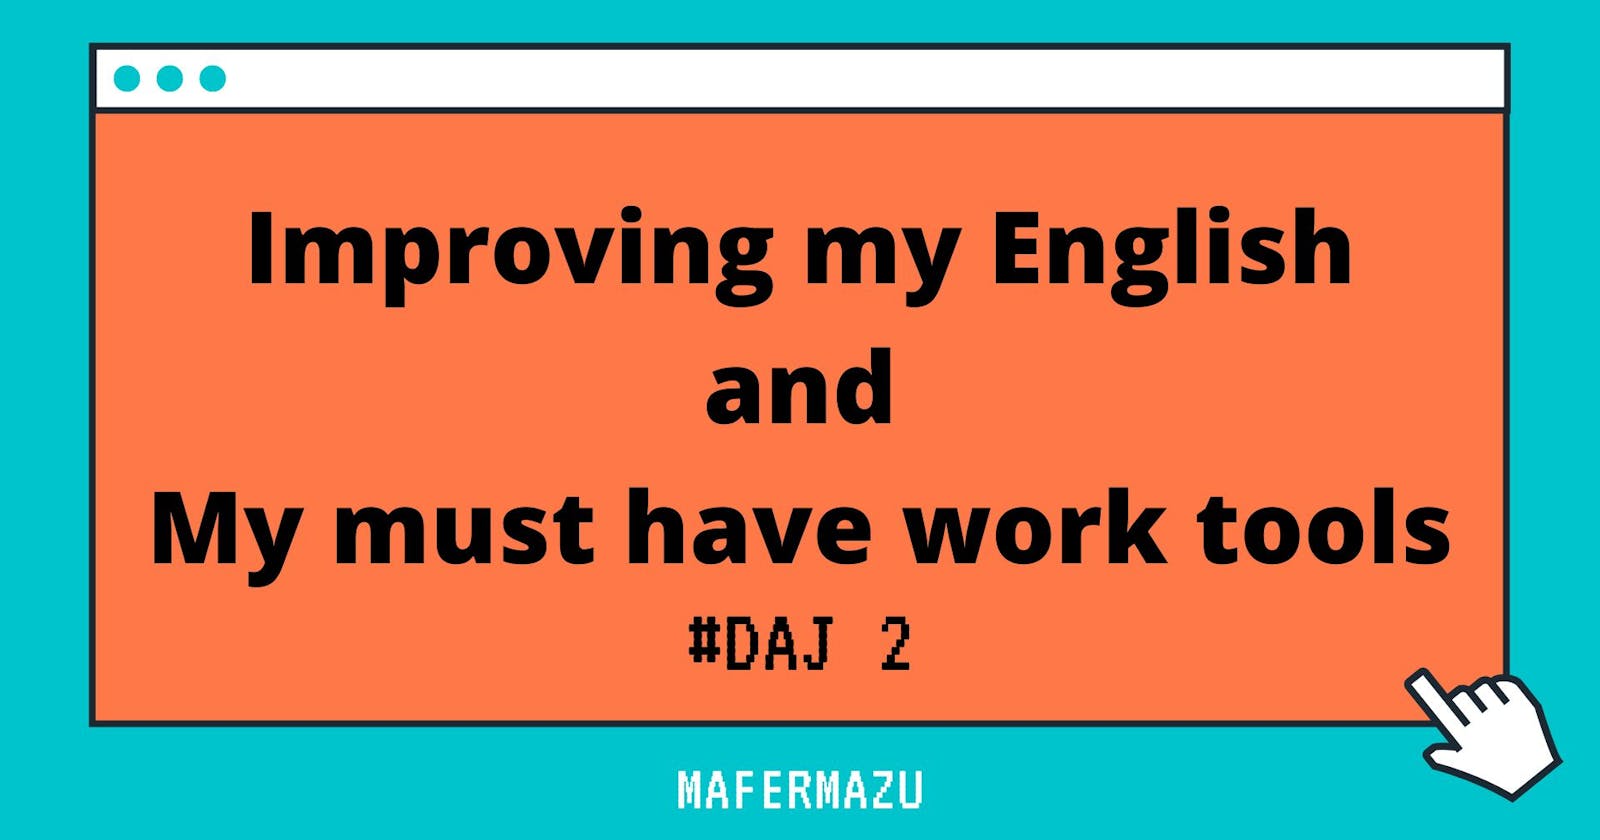 3 actions to improve my English and the tools I must have - Dev Advocate Journey #DAJ 2